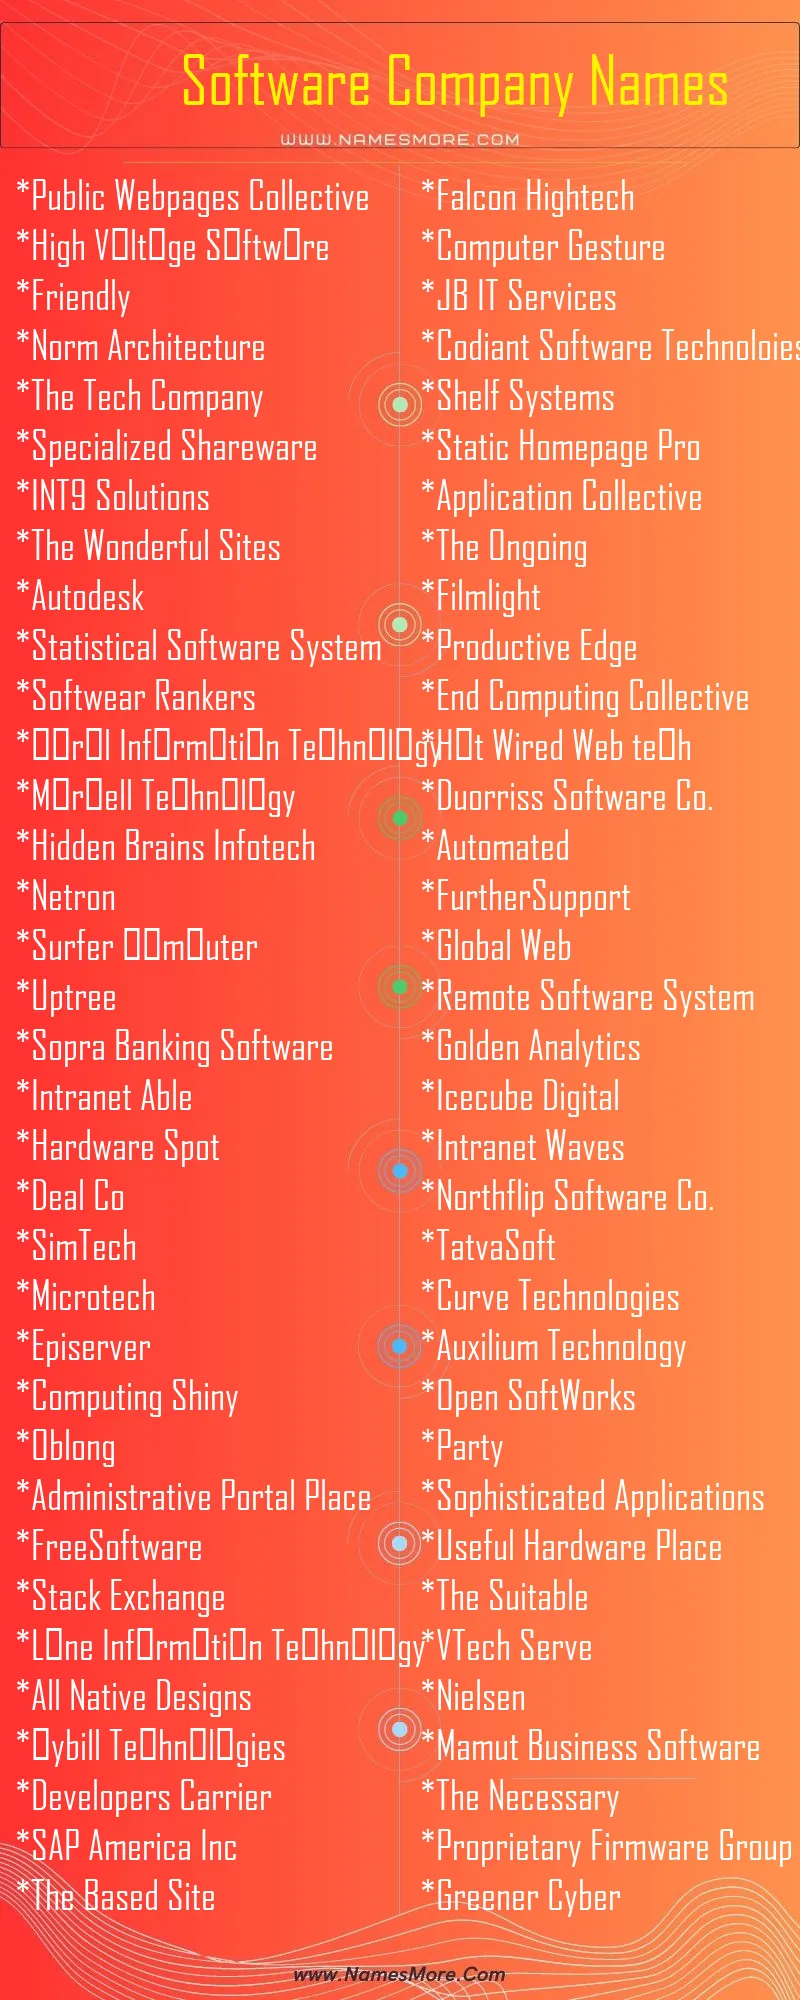 Software Company Names List Infographic